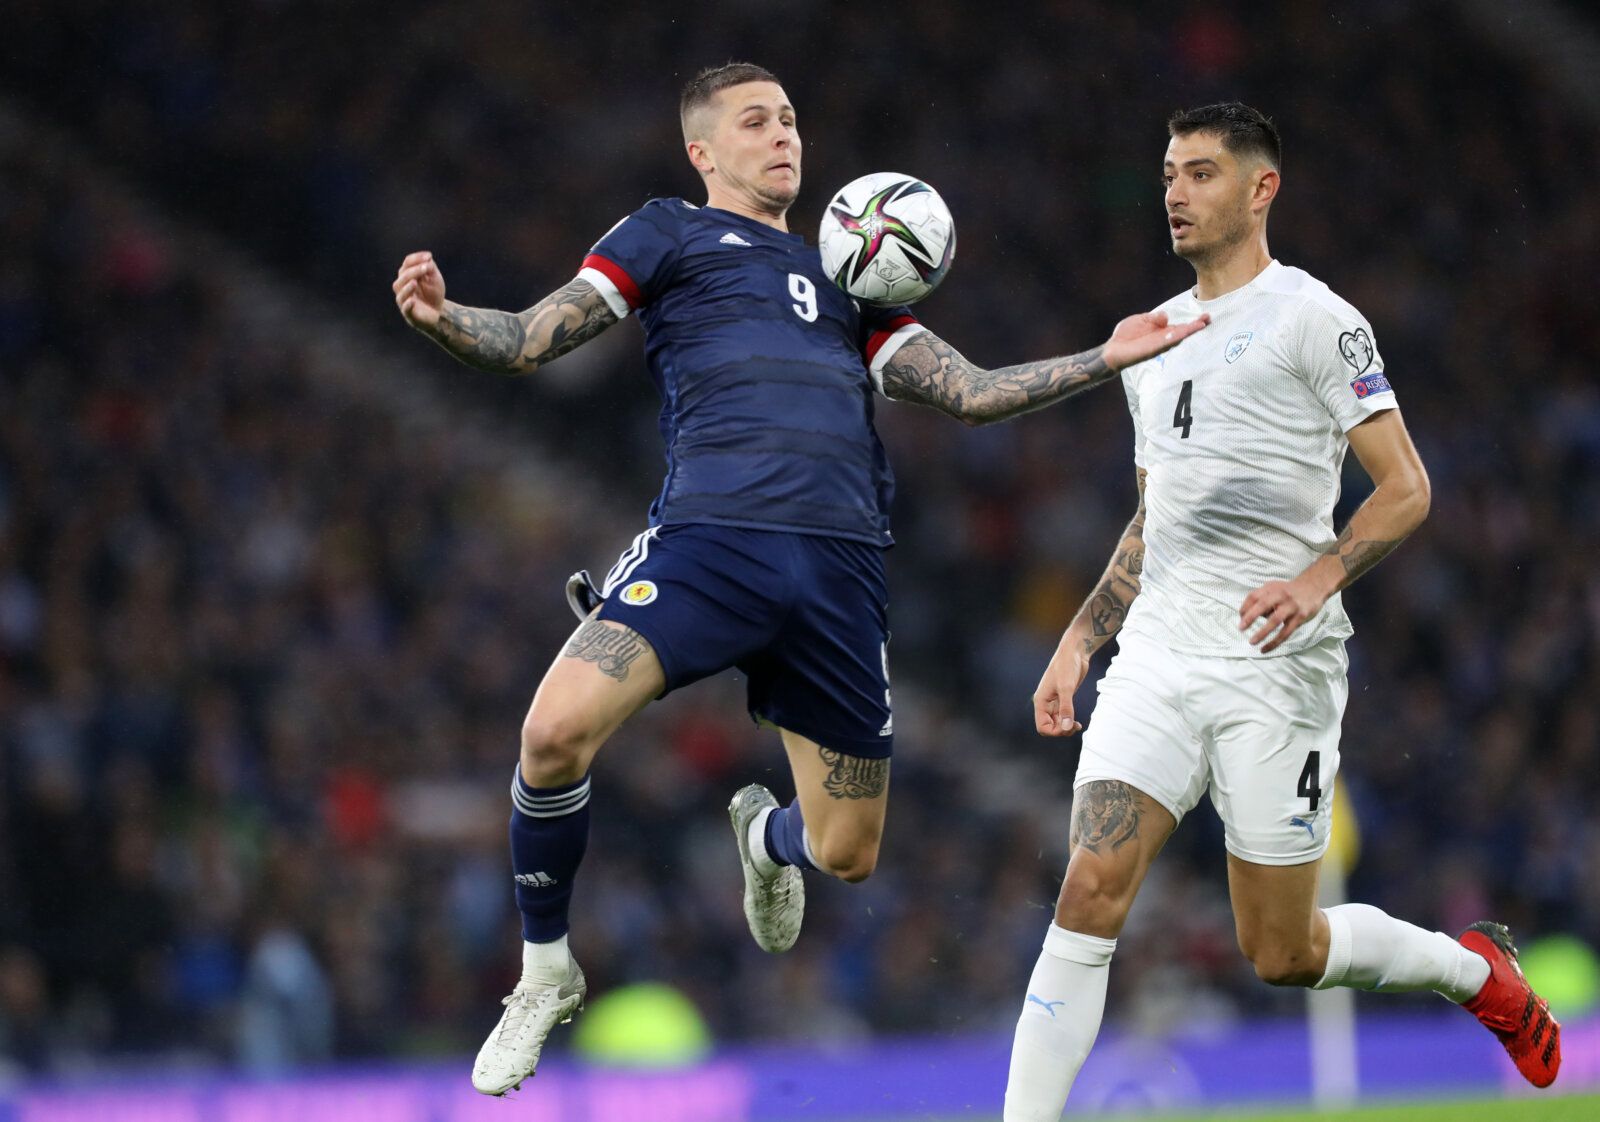 Soccer Football - World Cup - UEFA Qualifiers - Group F - Scotland v Israel - Hampden Park, Glasgow, Scotland, Britain - October 9, 2021  Scotland's Lyndon Dykes in action with Israel's Nir Bitton REUTERS/Russell Cheyne